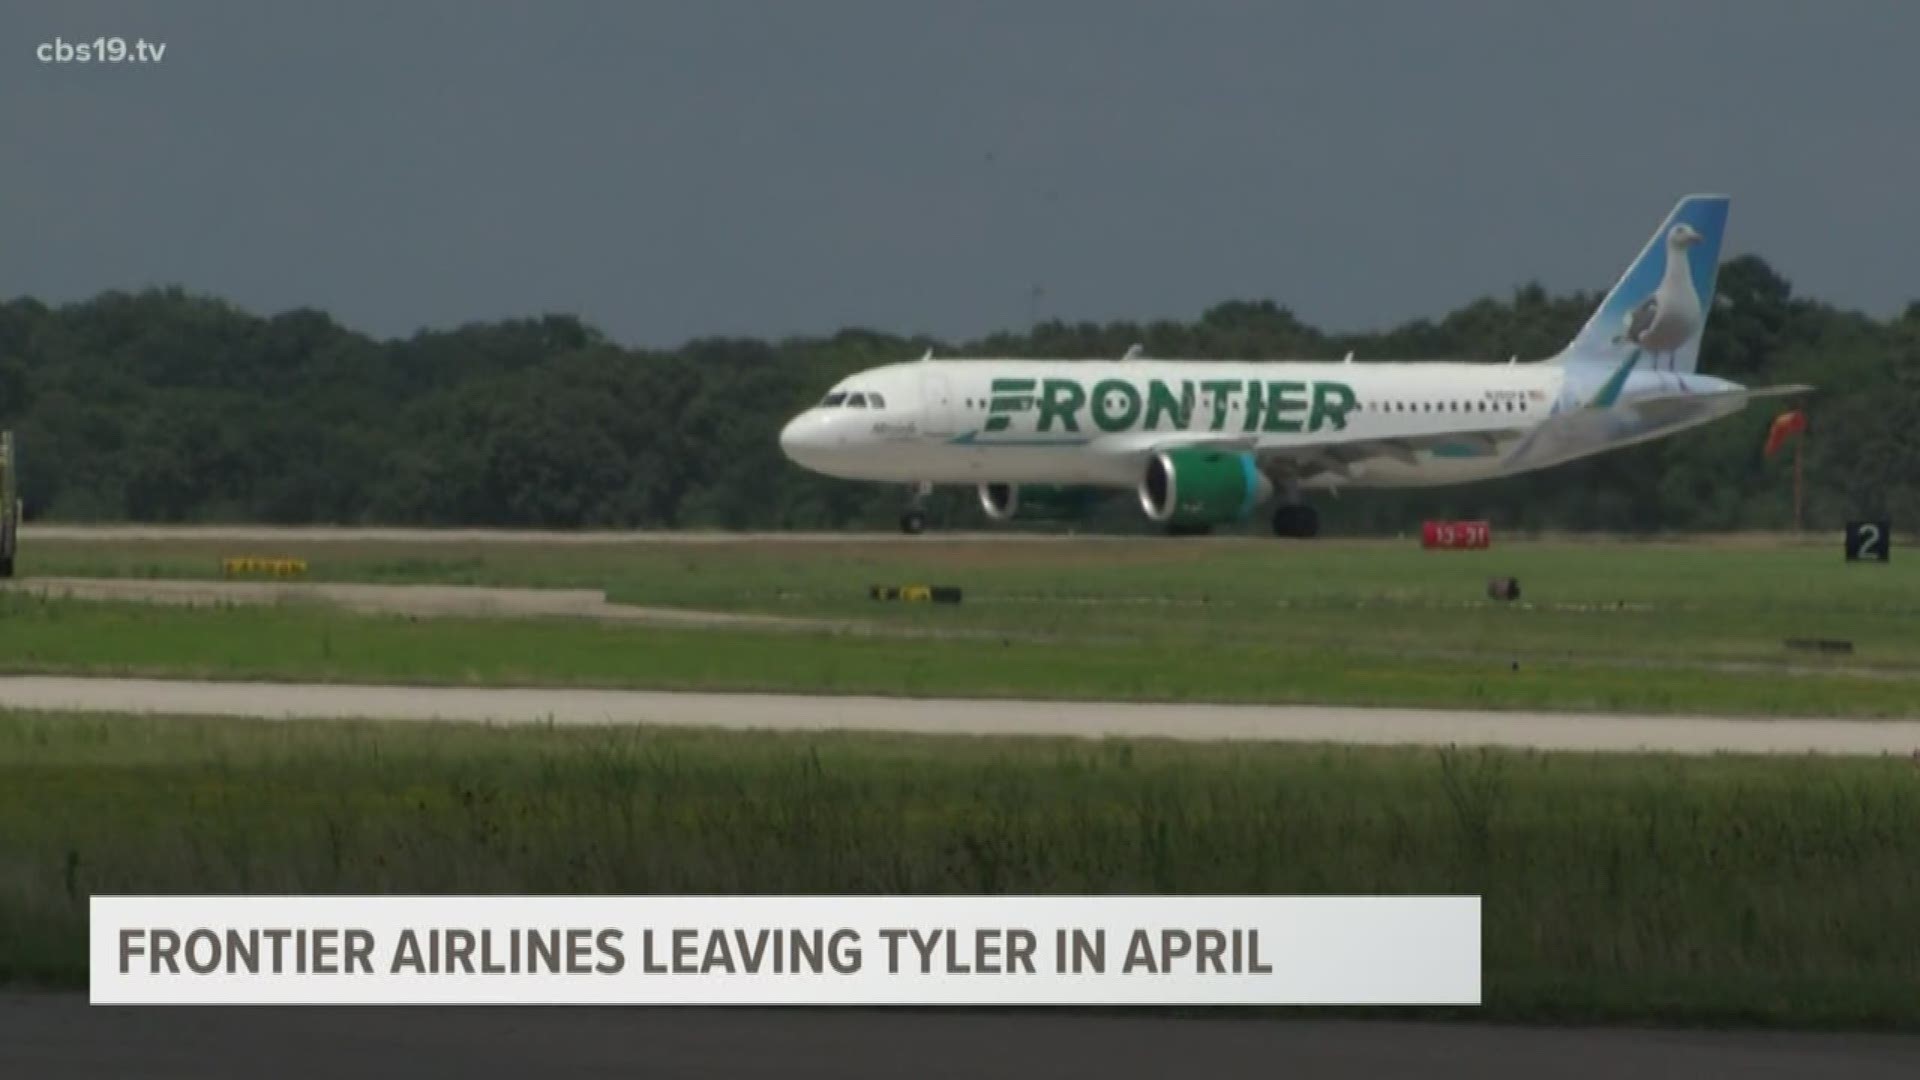 Frontier Airlines leaving Tyler in April